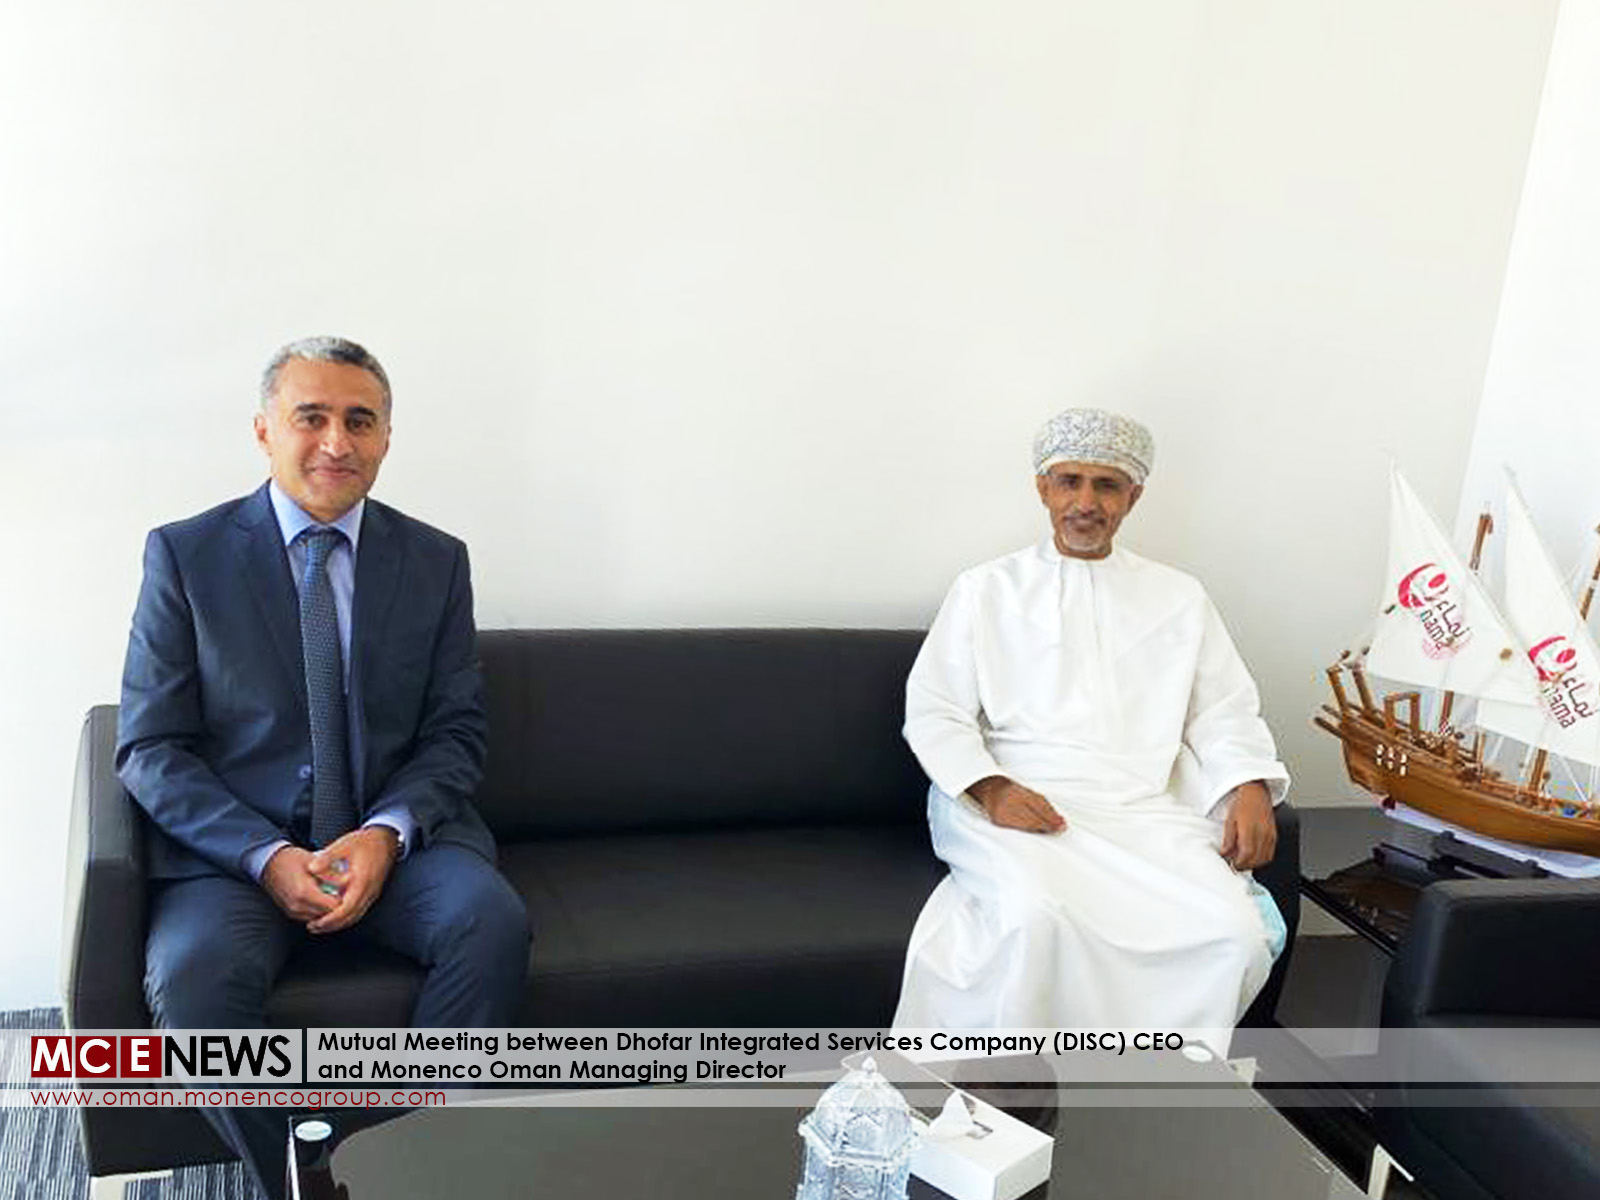 Mutual Meeting between Dhofar Integrated Services Company (DISC) CEO, Eng. Ali Issa Shamas and Monenco Consulting Engineers (MCE) Managing Director, Mr. Saeid Tamaddon